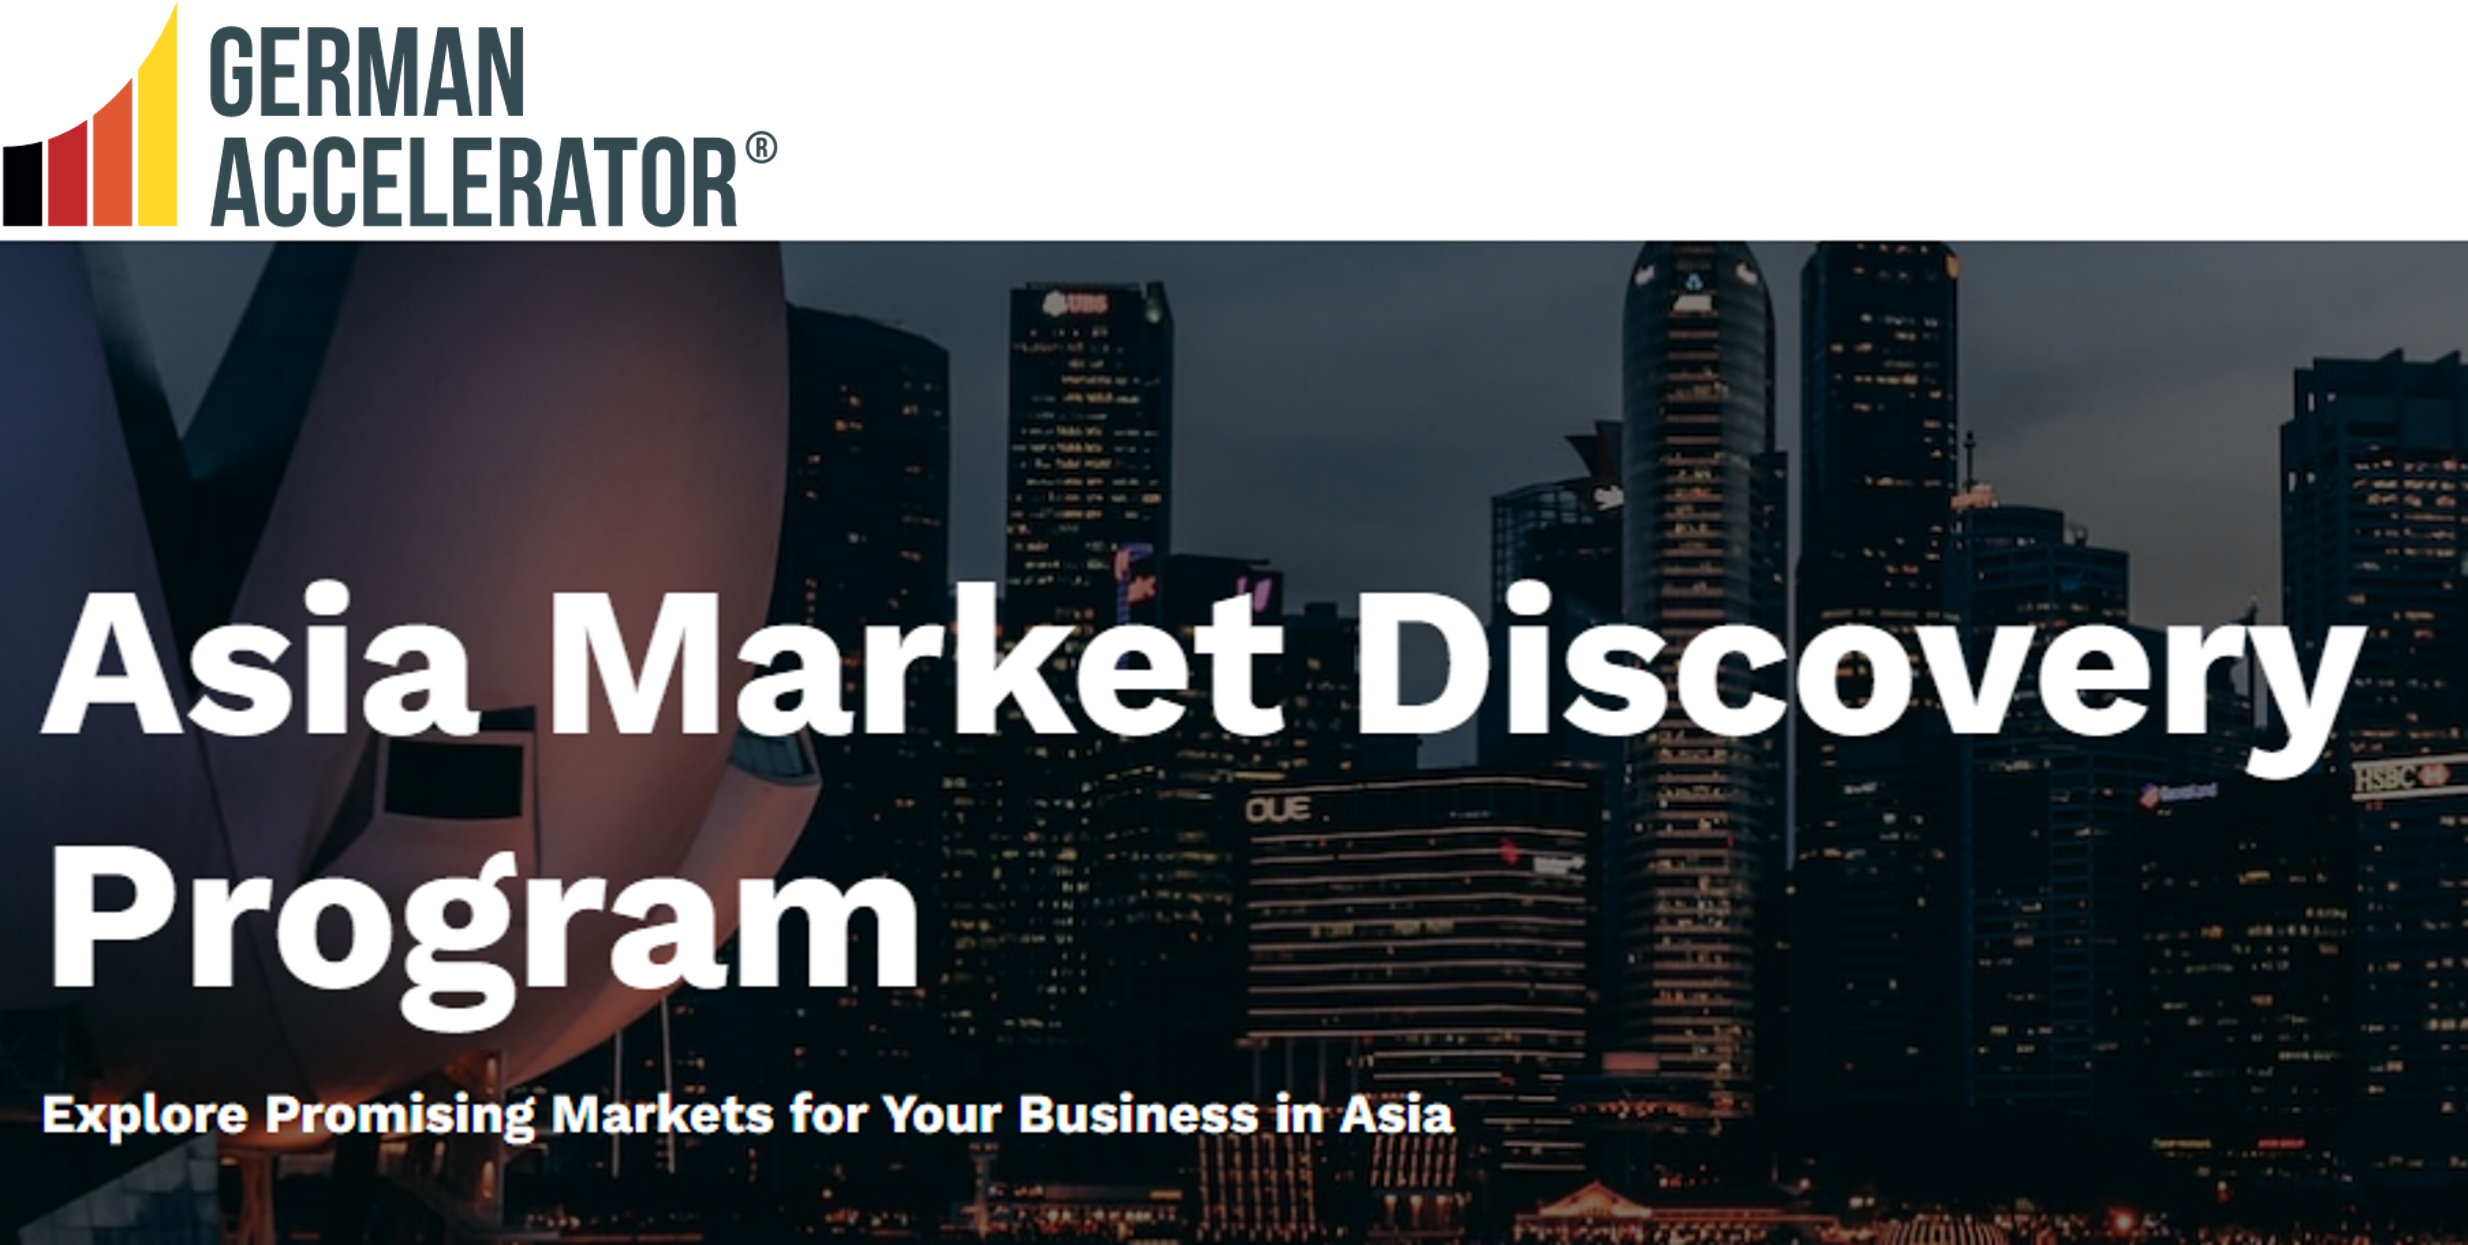 LIVID secures place in the Asian Market Discovery Class of the German Accelerator Program